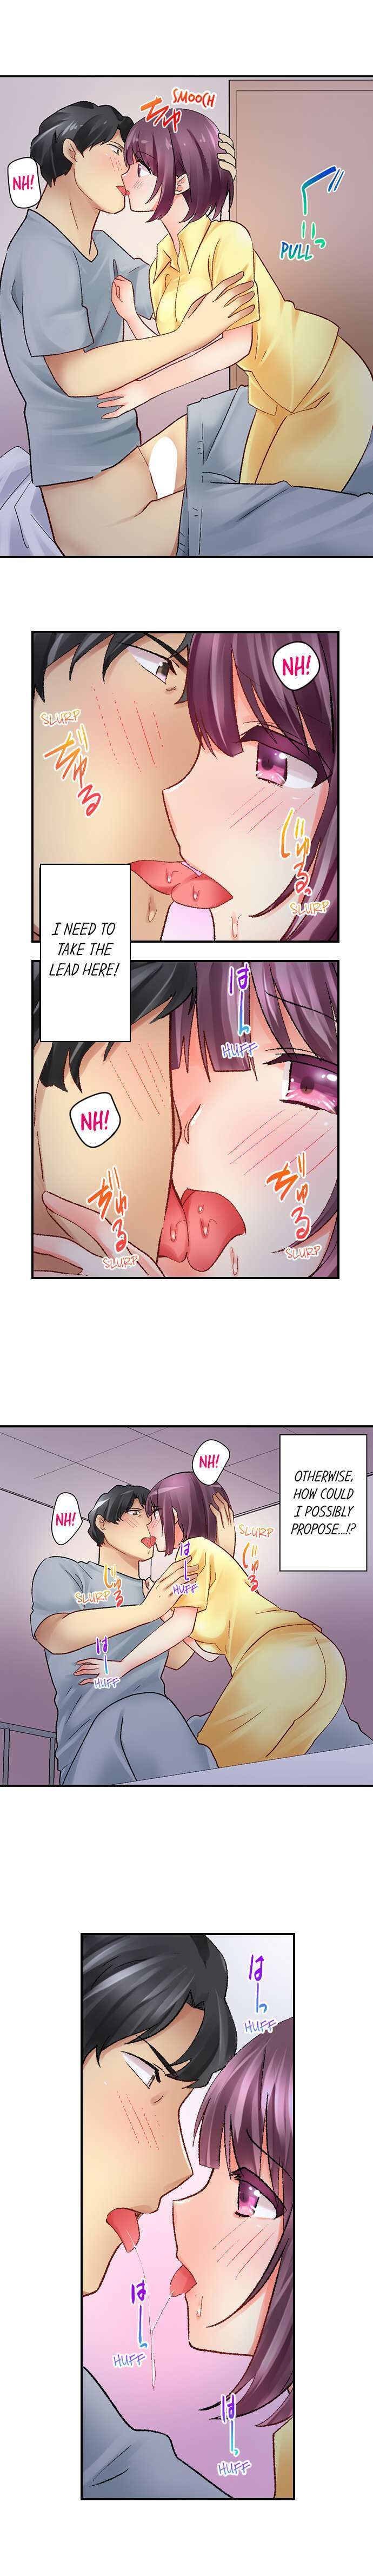 Our Kinky Newlywed Life - Chapter 32 Page 4